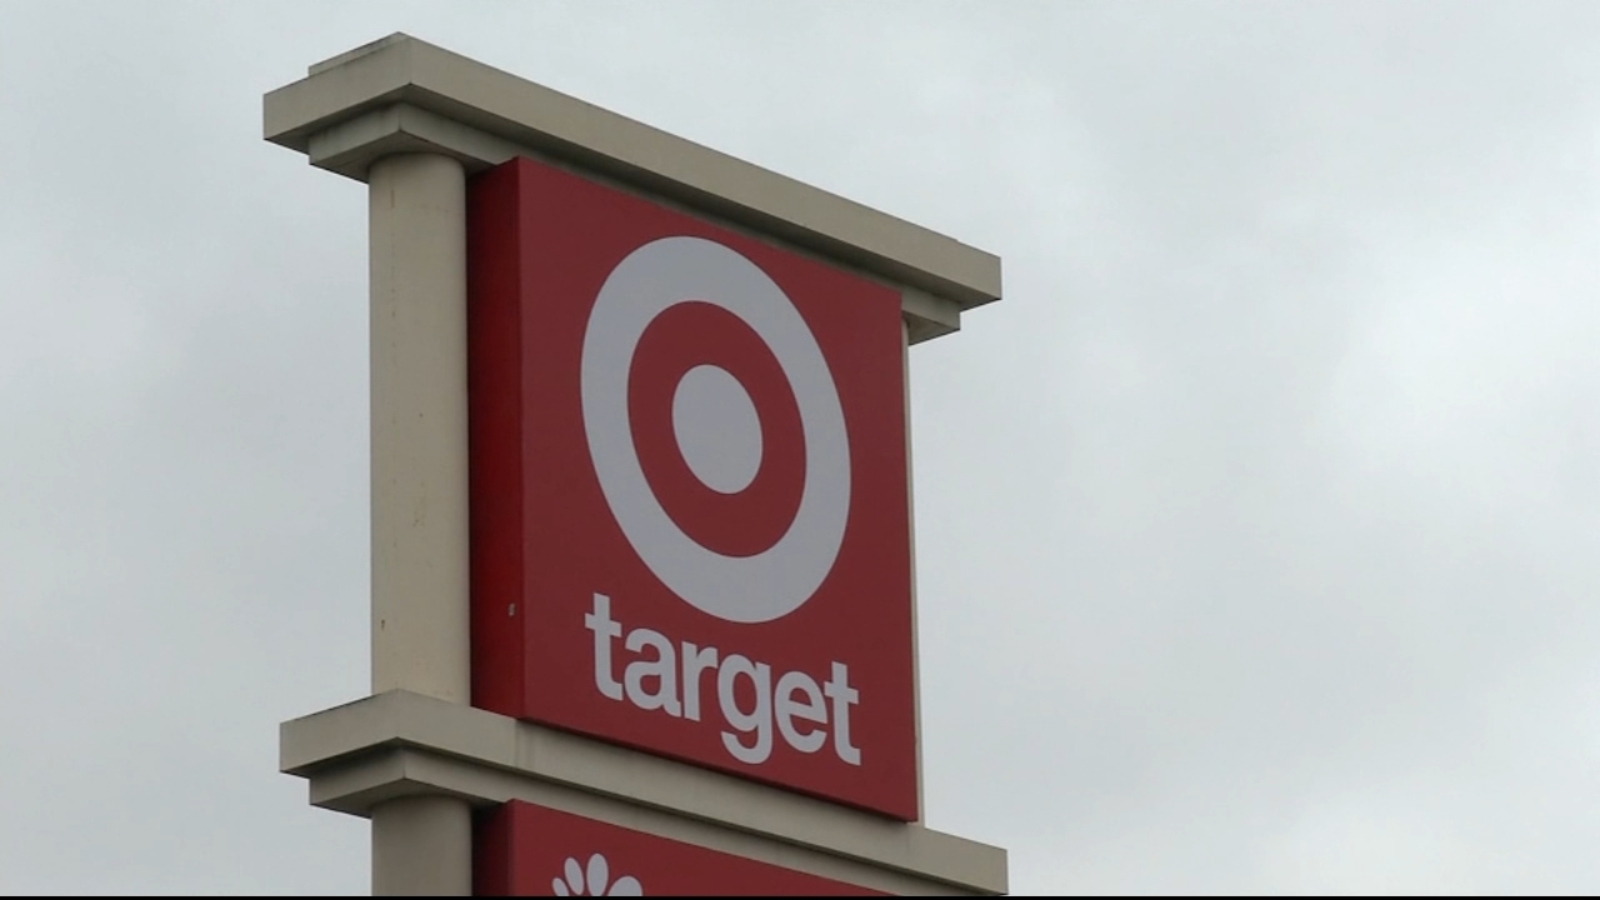 Target self checkout policy to officially launch nationwide on March 17 | What shoppers need to know [Video]